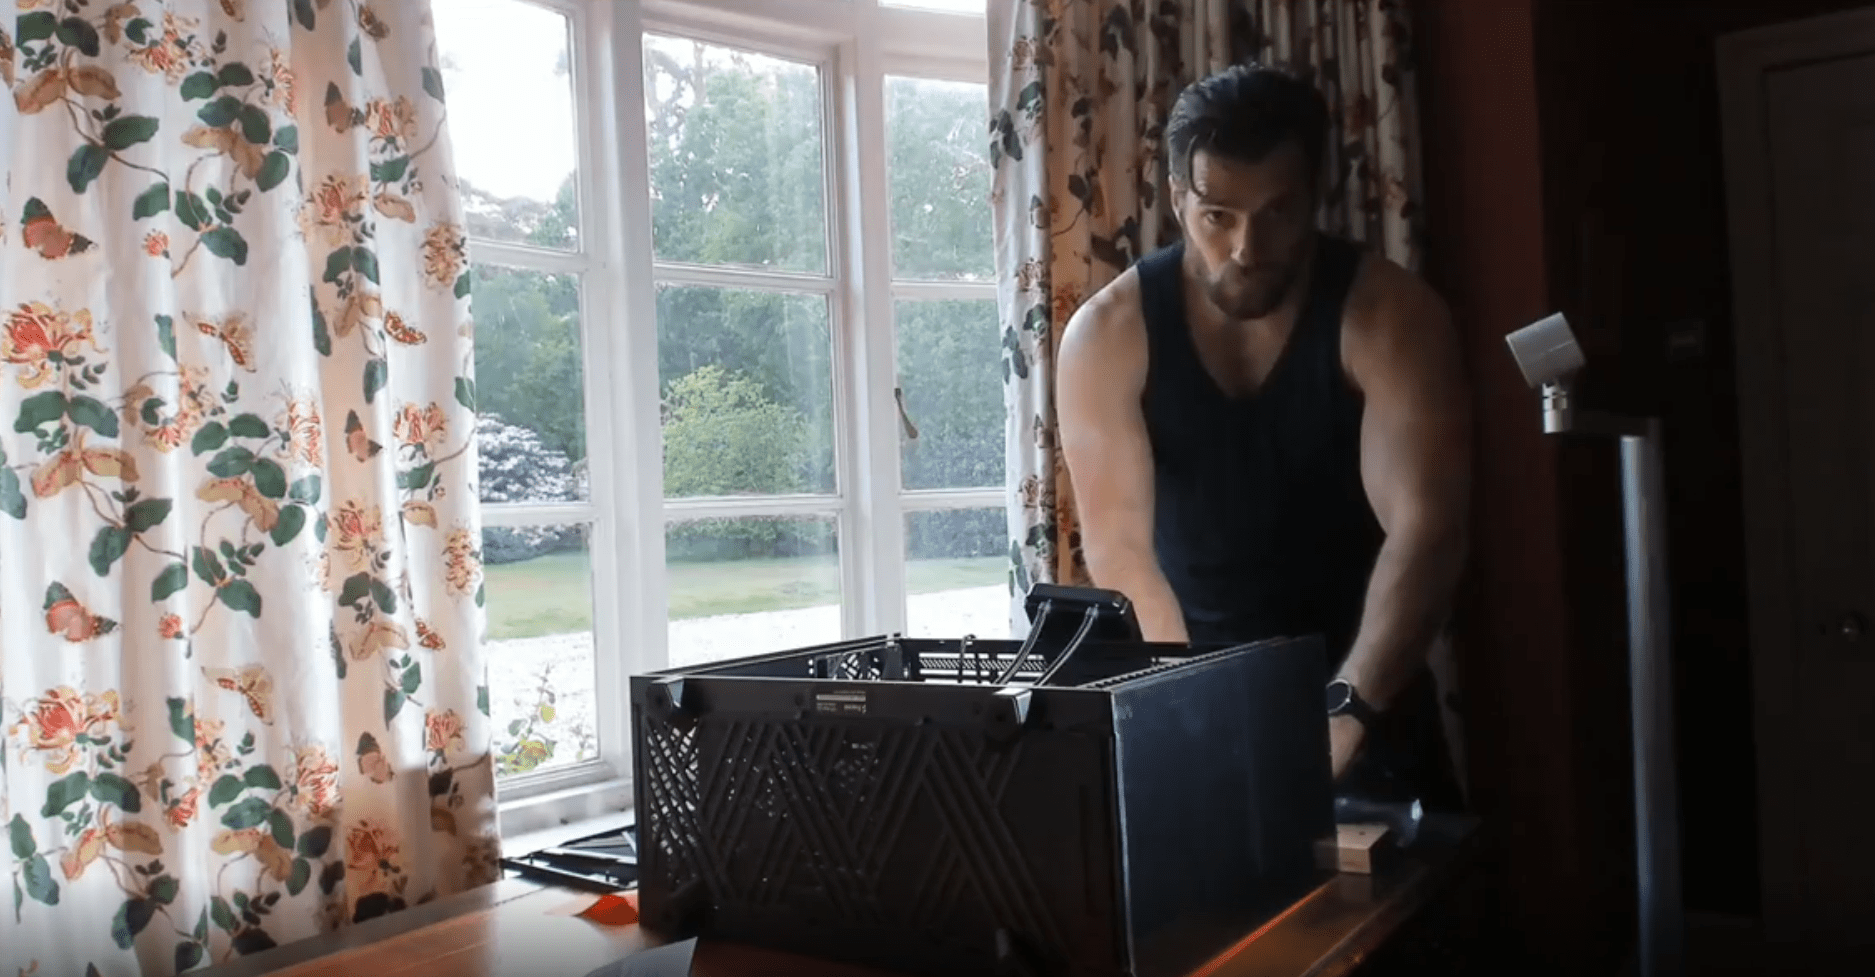 Henry Cavill teaches you the correct way to build a gaming PC